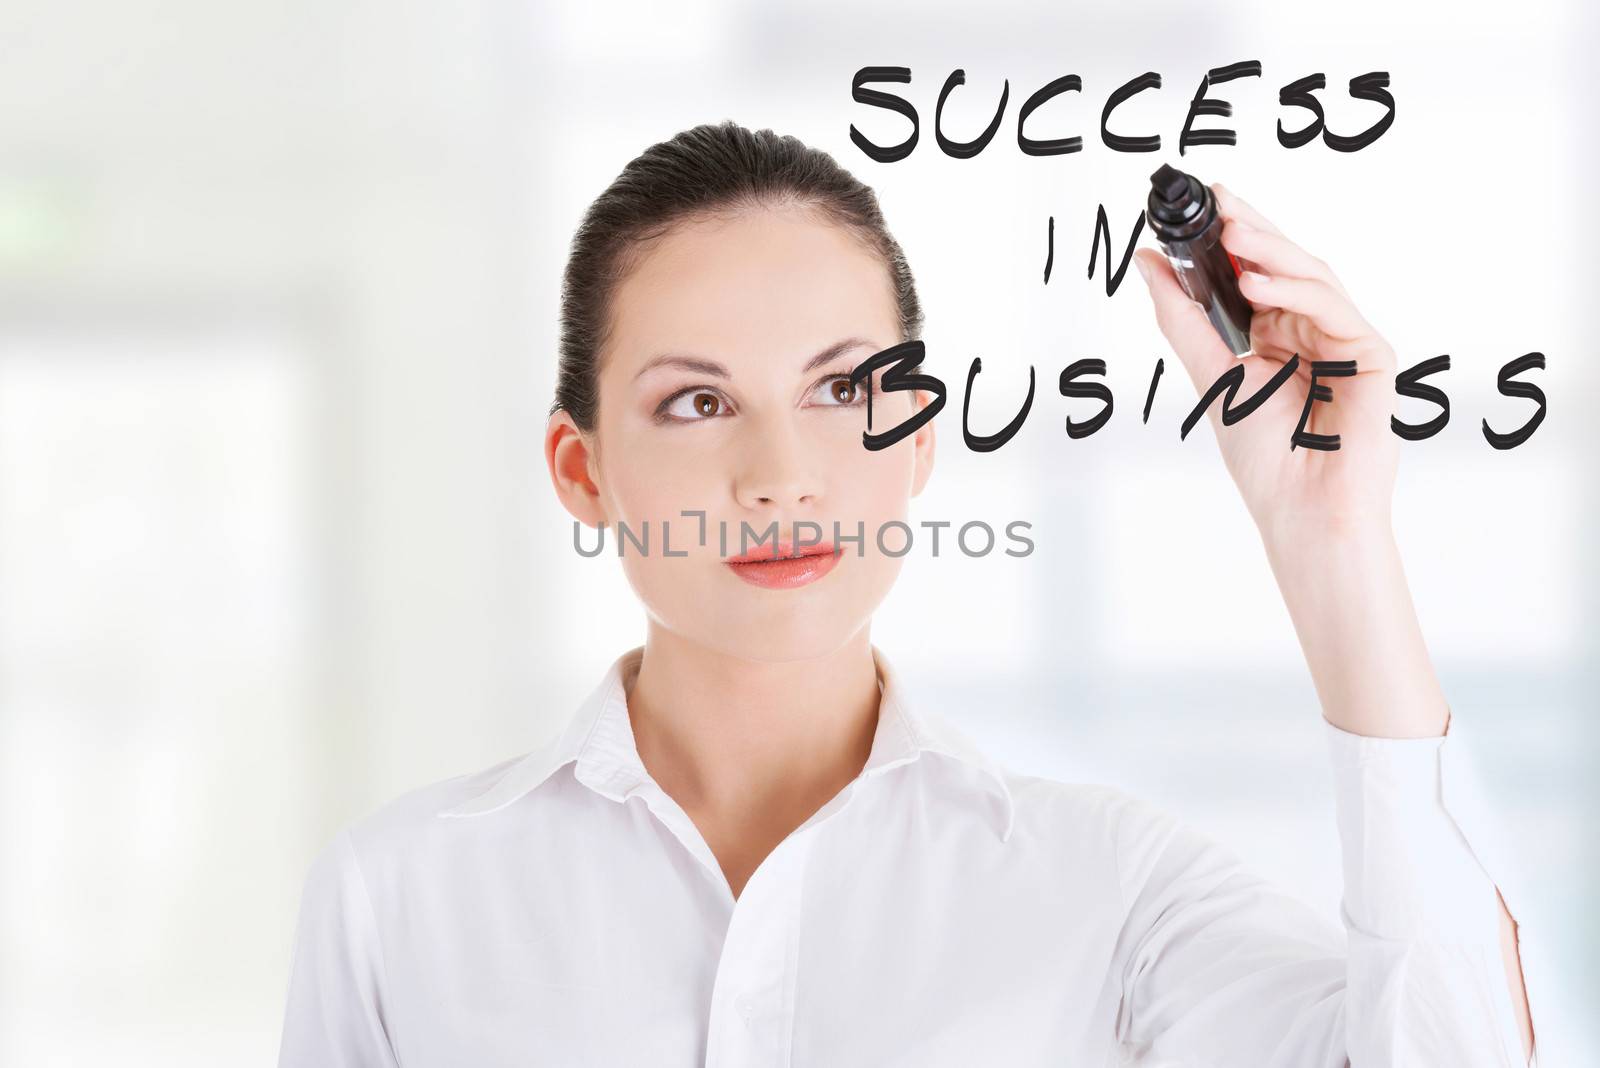 Young businesswoman writing something on abstract screen